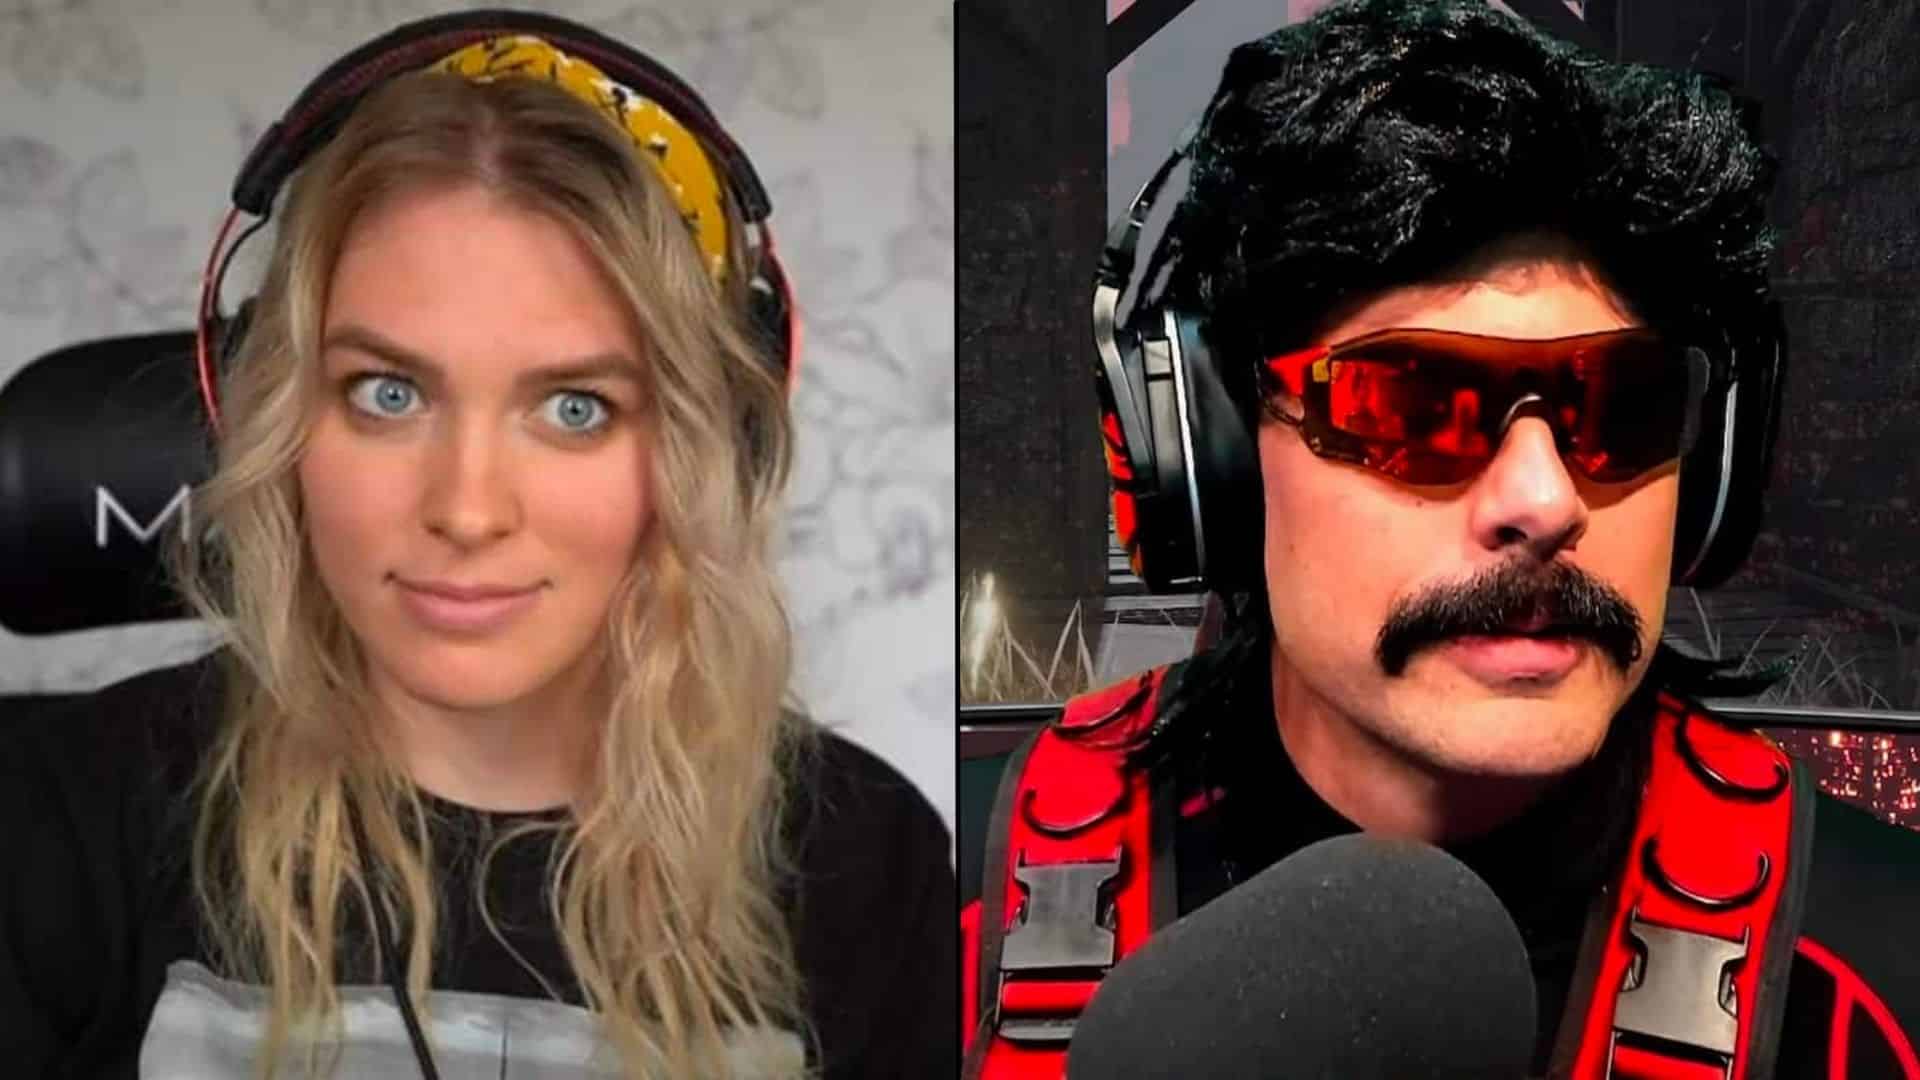 QTCinderella and Dr Disrespect side-by-side on camera